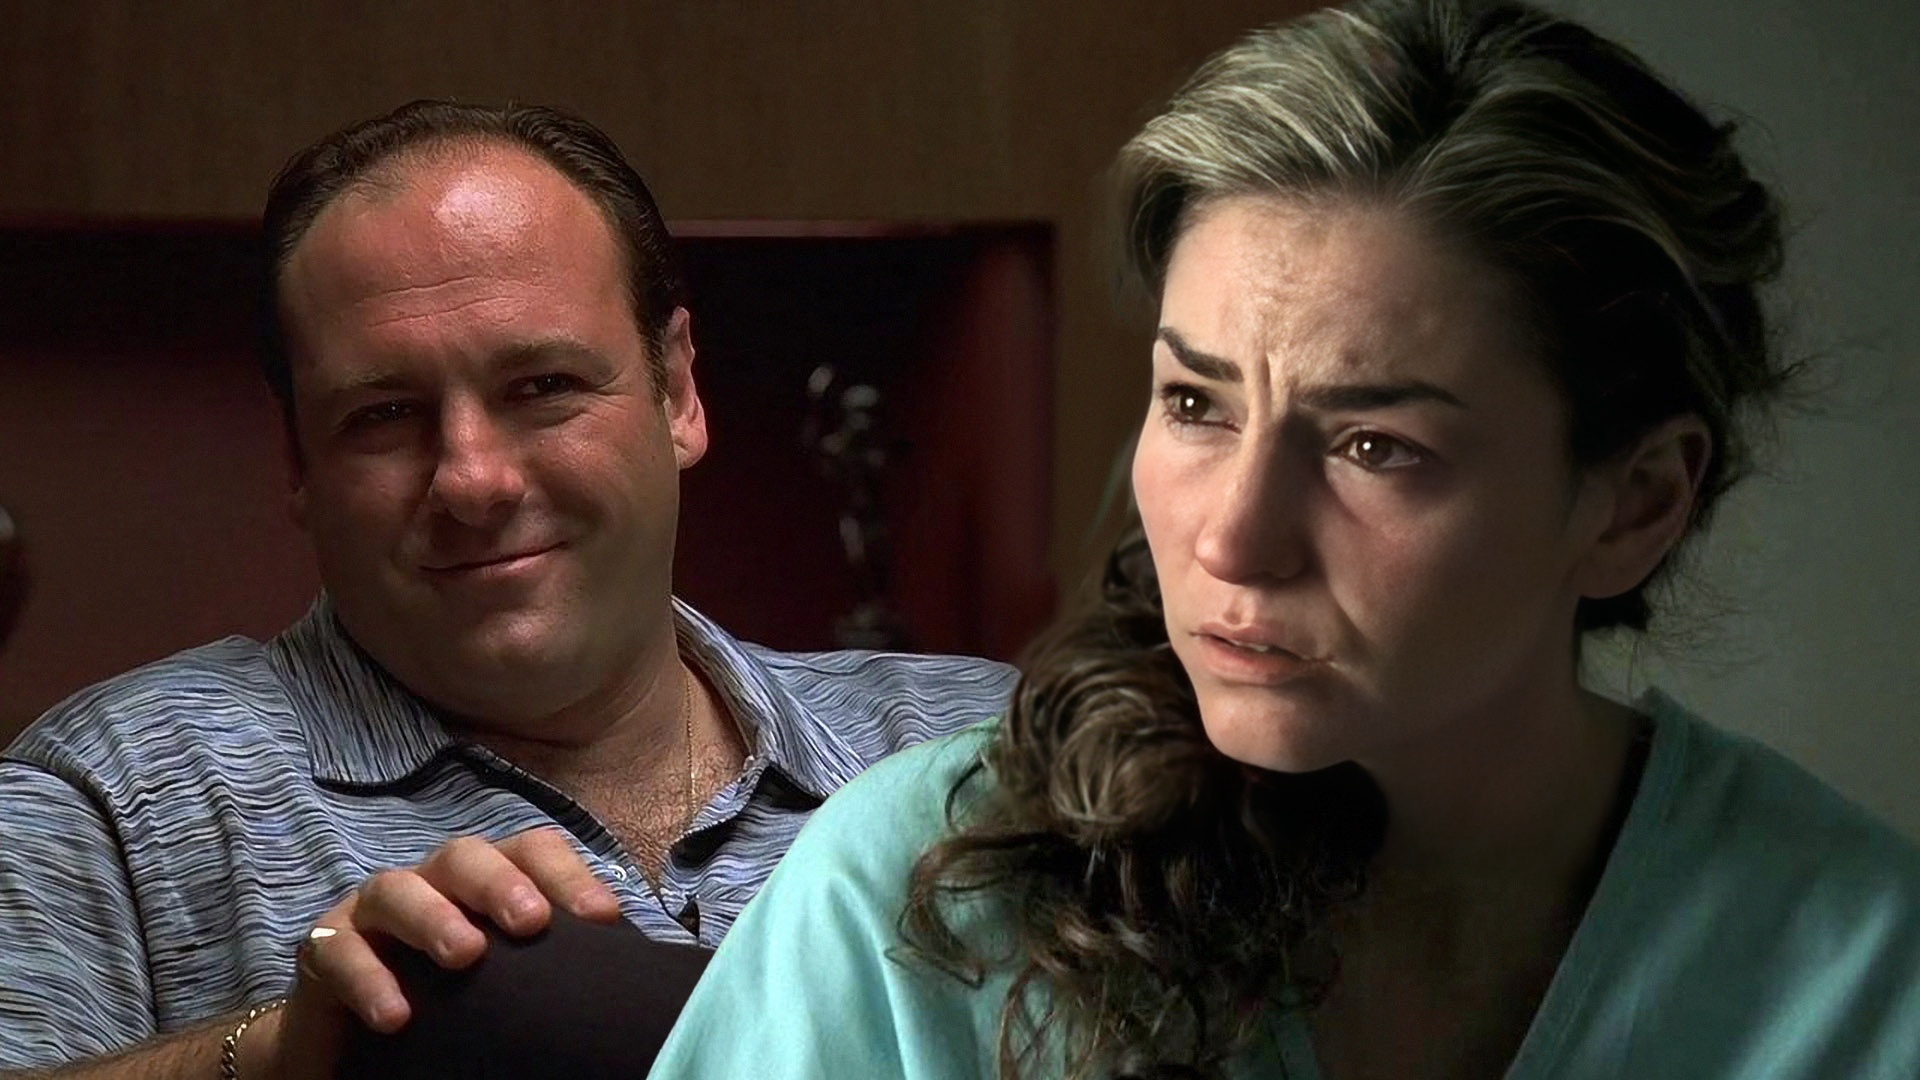 Twenty-five Years After Its Debut, The Sopranos Remains a Cult Show, Here's Why